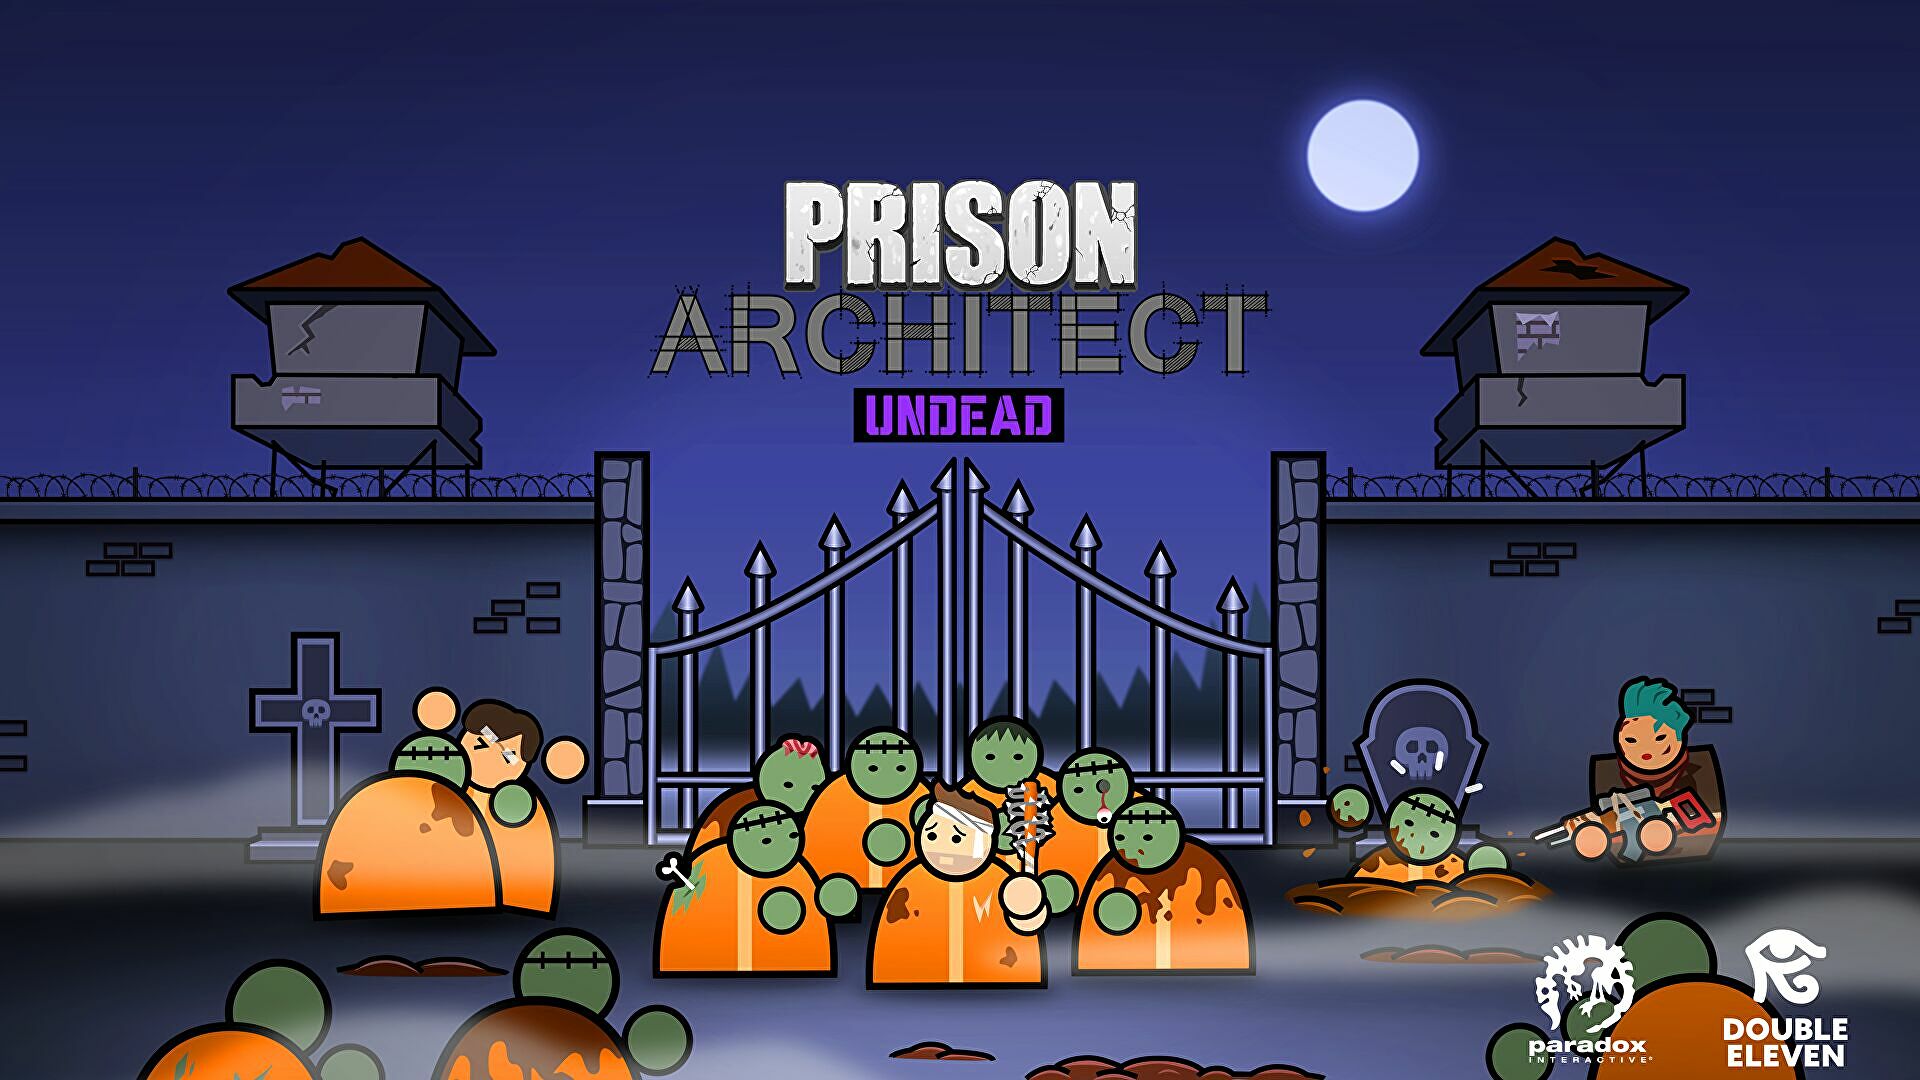 Prison Architect’s Undead DLC will add zombies in time for Halloween